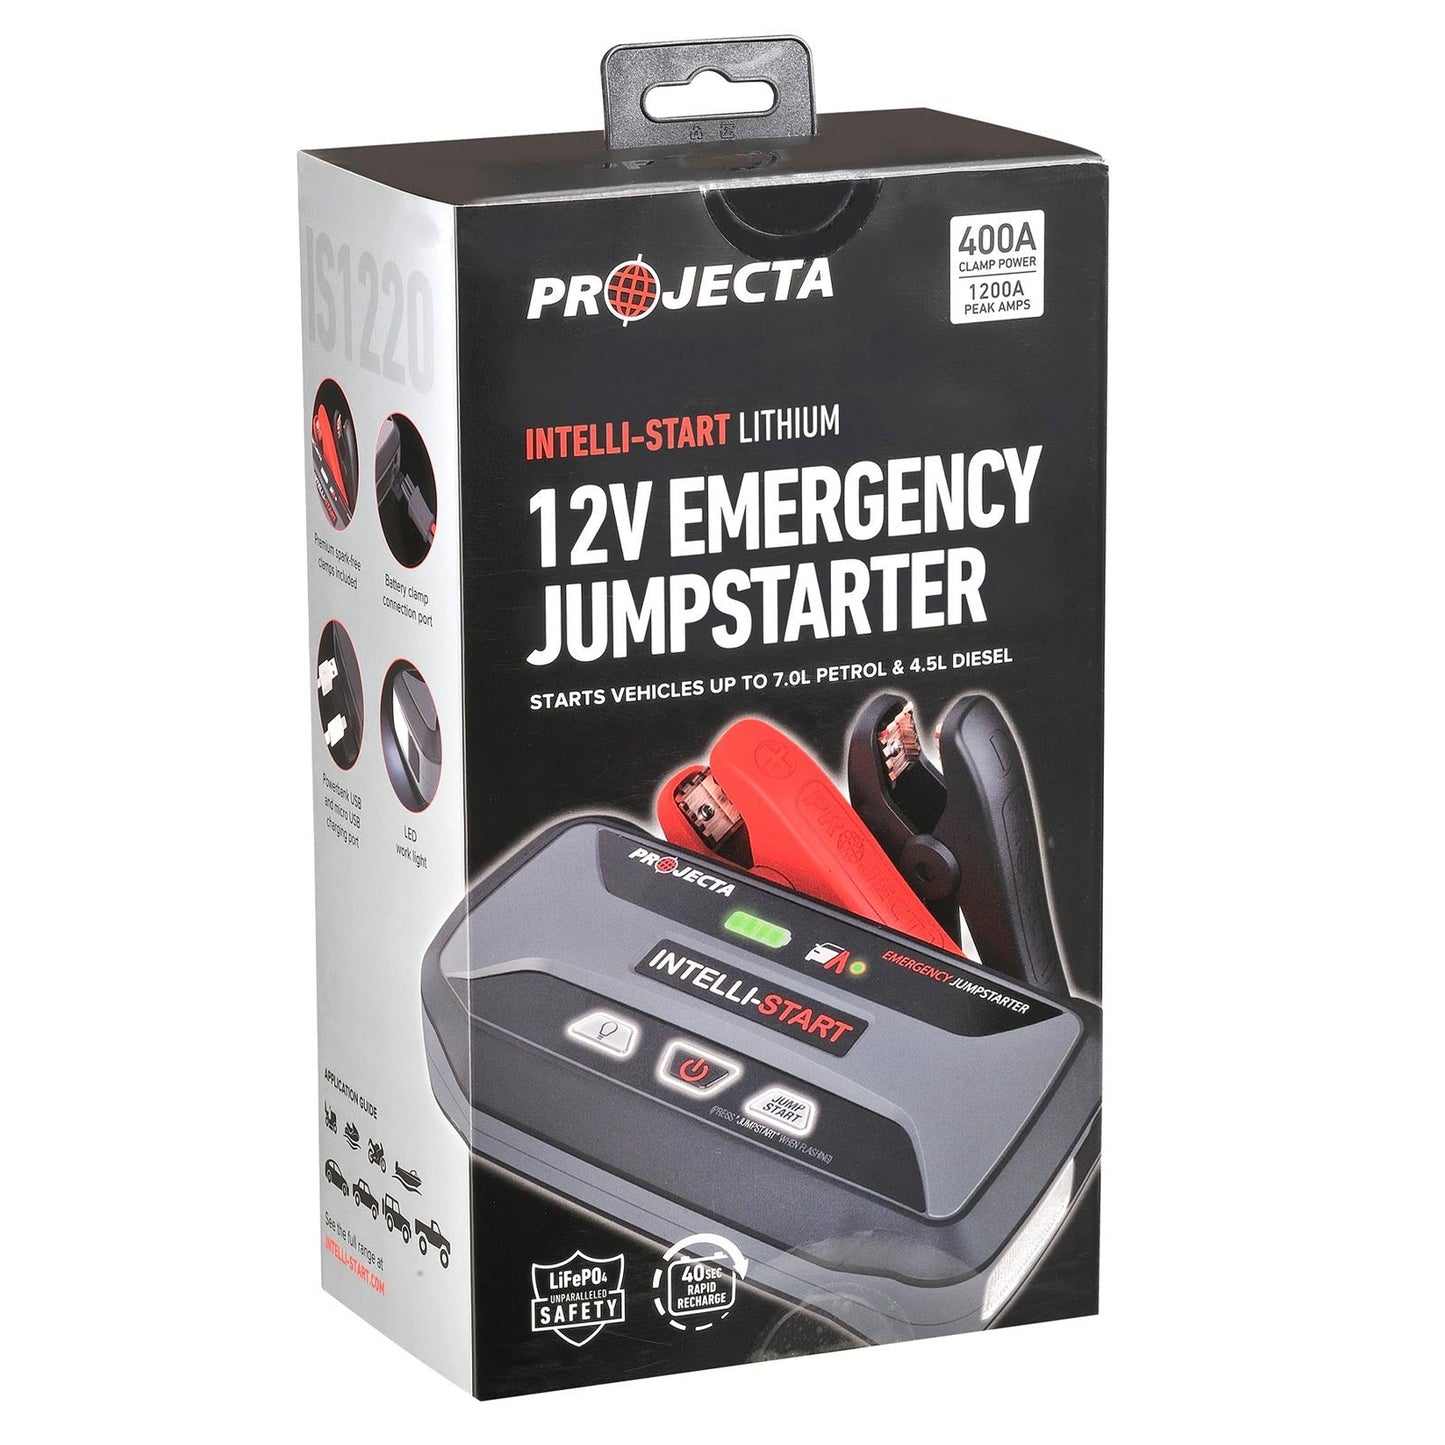 INTELLI-START 12V 1200A LITHIUM EMERGENCY JUMPSTARTER AND POWER BANK IS1220